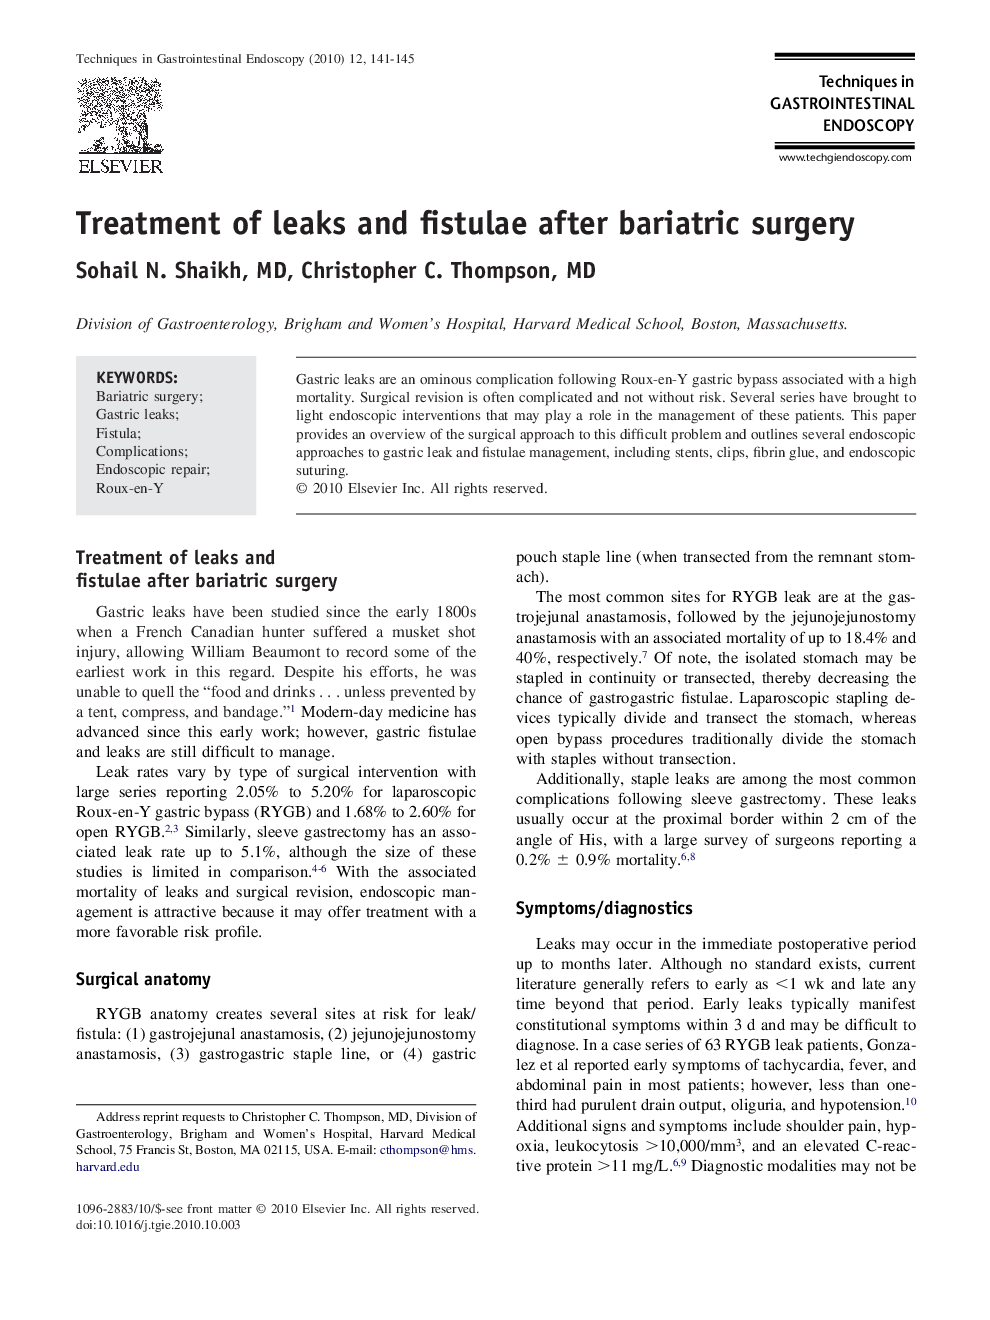 Treatment of leaks and fistulae after bariatric surgery